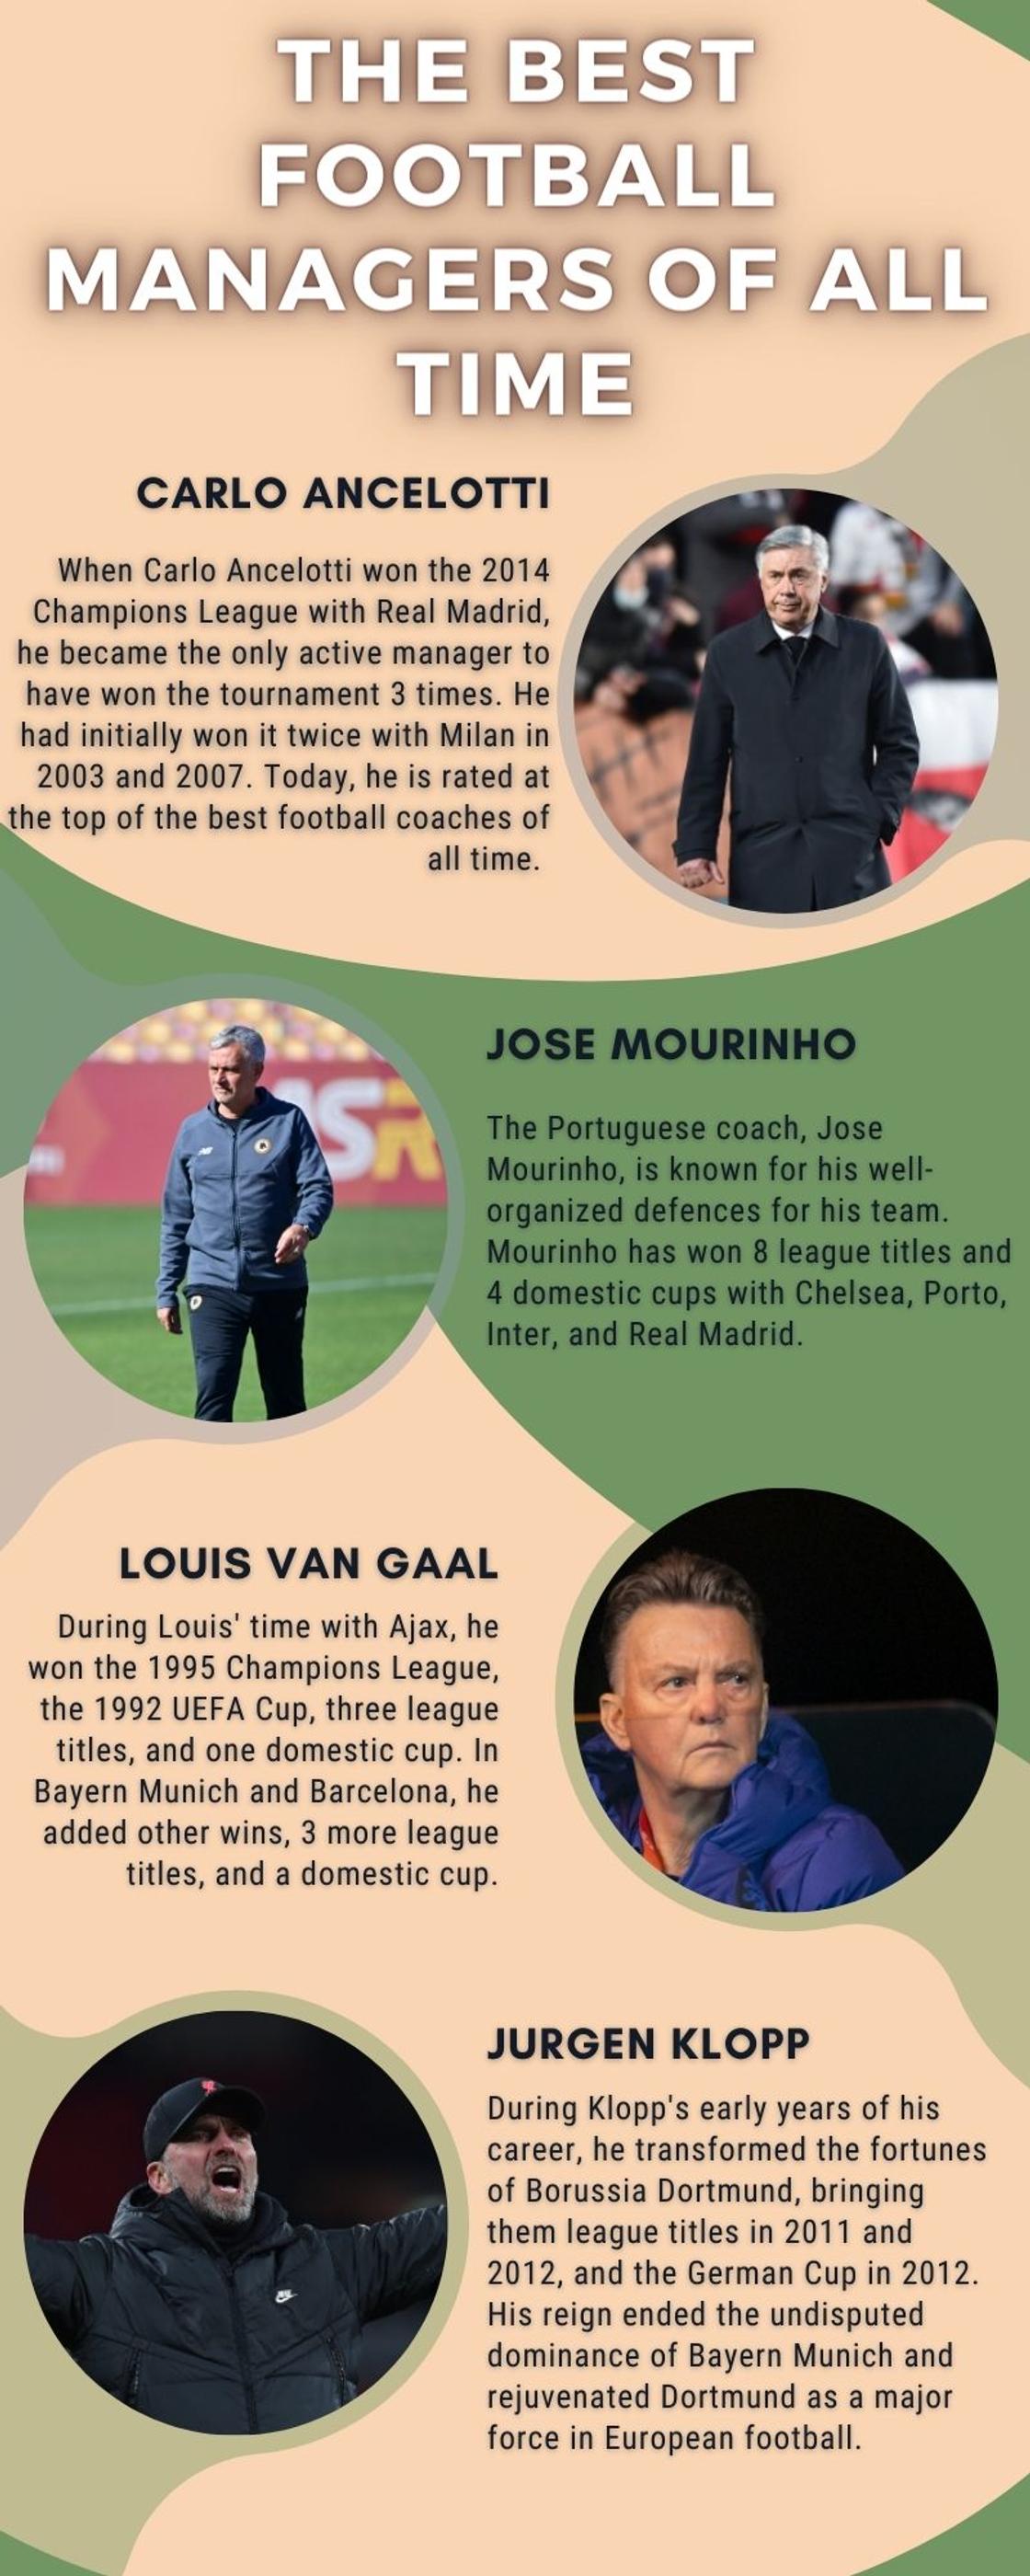 The best football managers